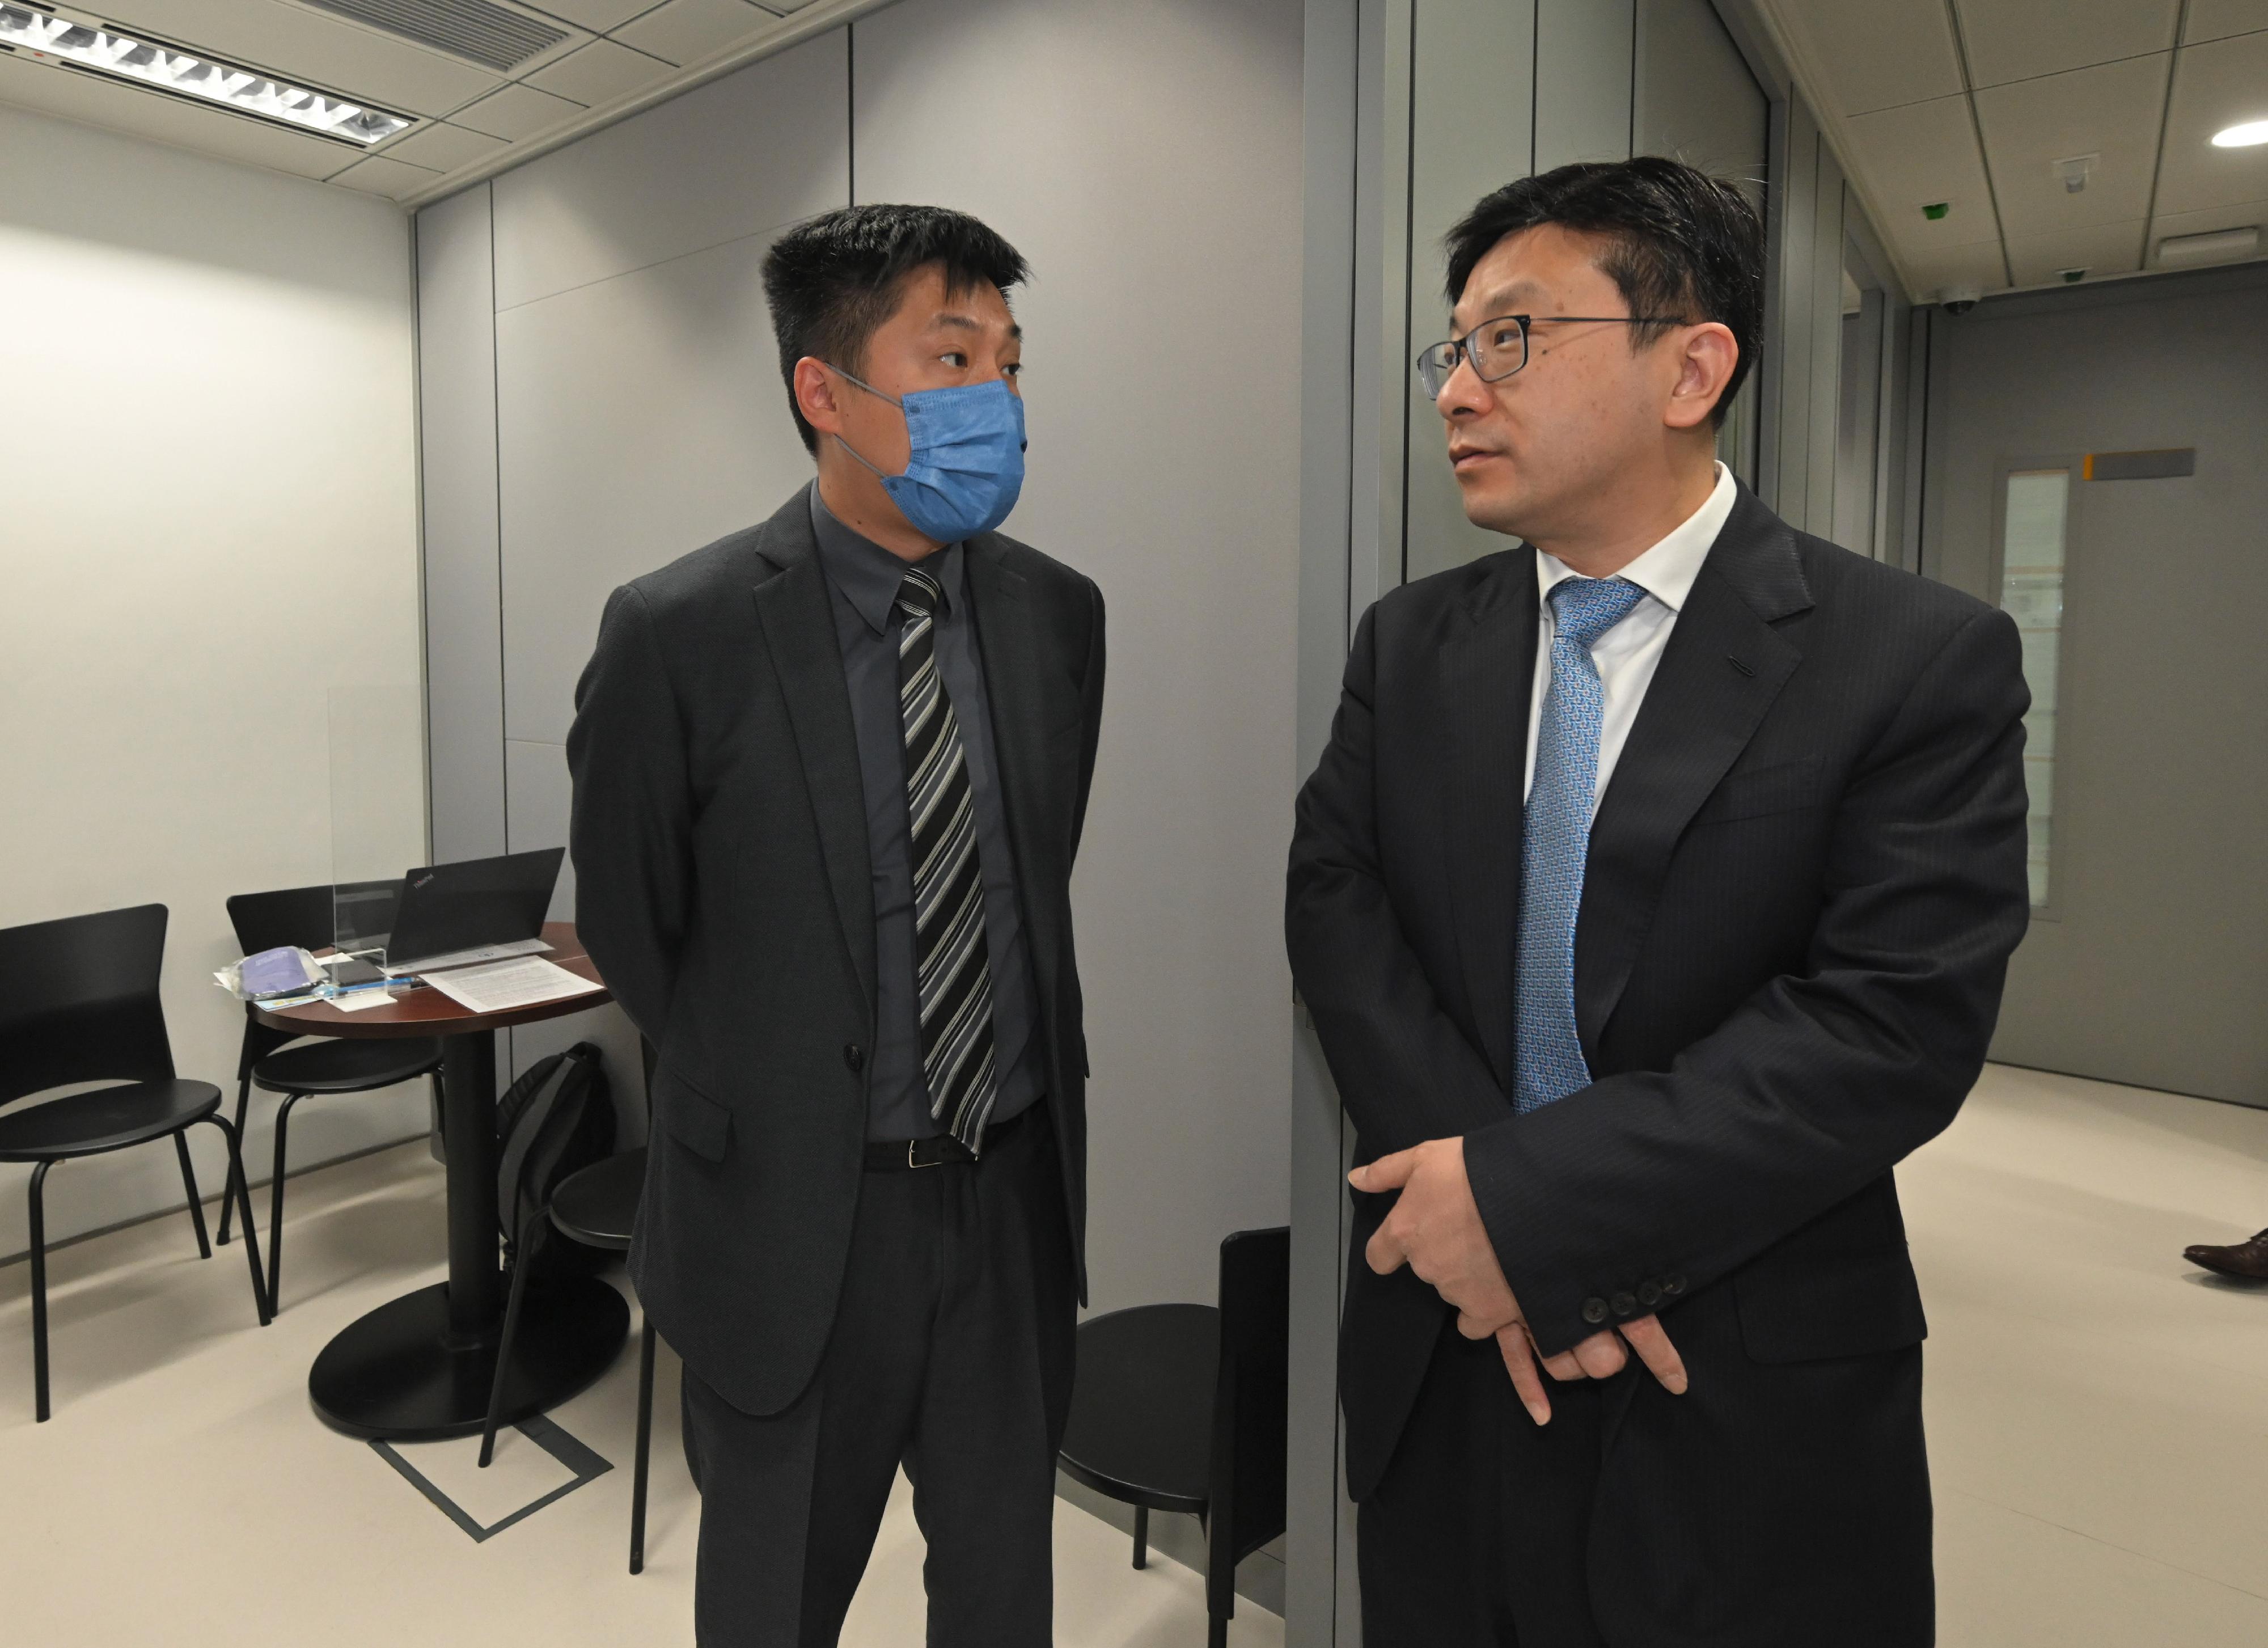 The Secretary for Labour and Welfare, Mr Chris Sun, today (March 1) visited the Recruitment Centre for the Catering Industry and the Recruitment Centre for the Retail Industry at the Treasury Building in Cheung Sha Wan to take a closer look at the enhanced employment services of the Labour Department upon resumption of economic activities following the lifting of all mandatory mask-wearing requirements in Hong Kong. The Commissioner for Labour, Ms May Chan, also joined the visit. Photo shows Mr Sun (right) learning more about recent recruitment activities and the latest manpower conditions of individual job titles from an employer representative in an interview room.